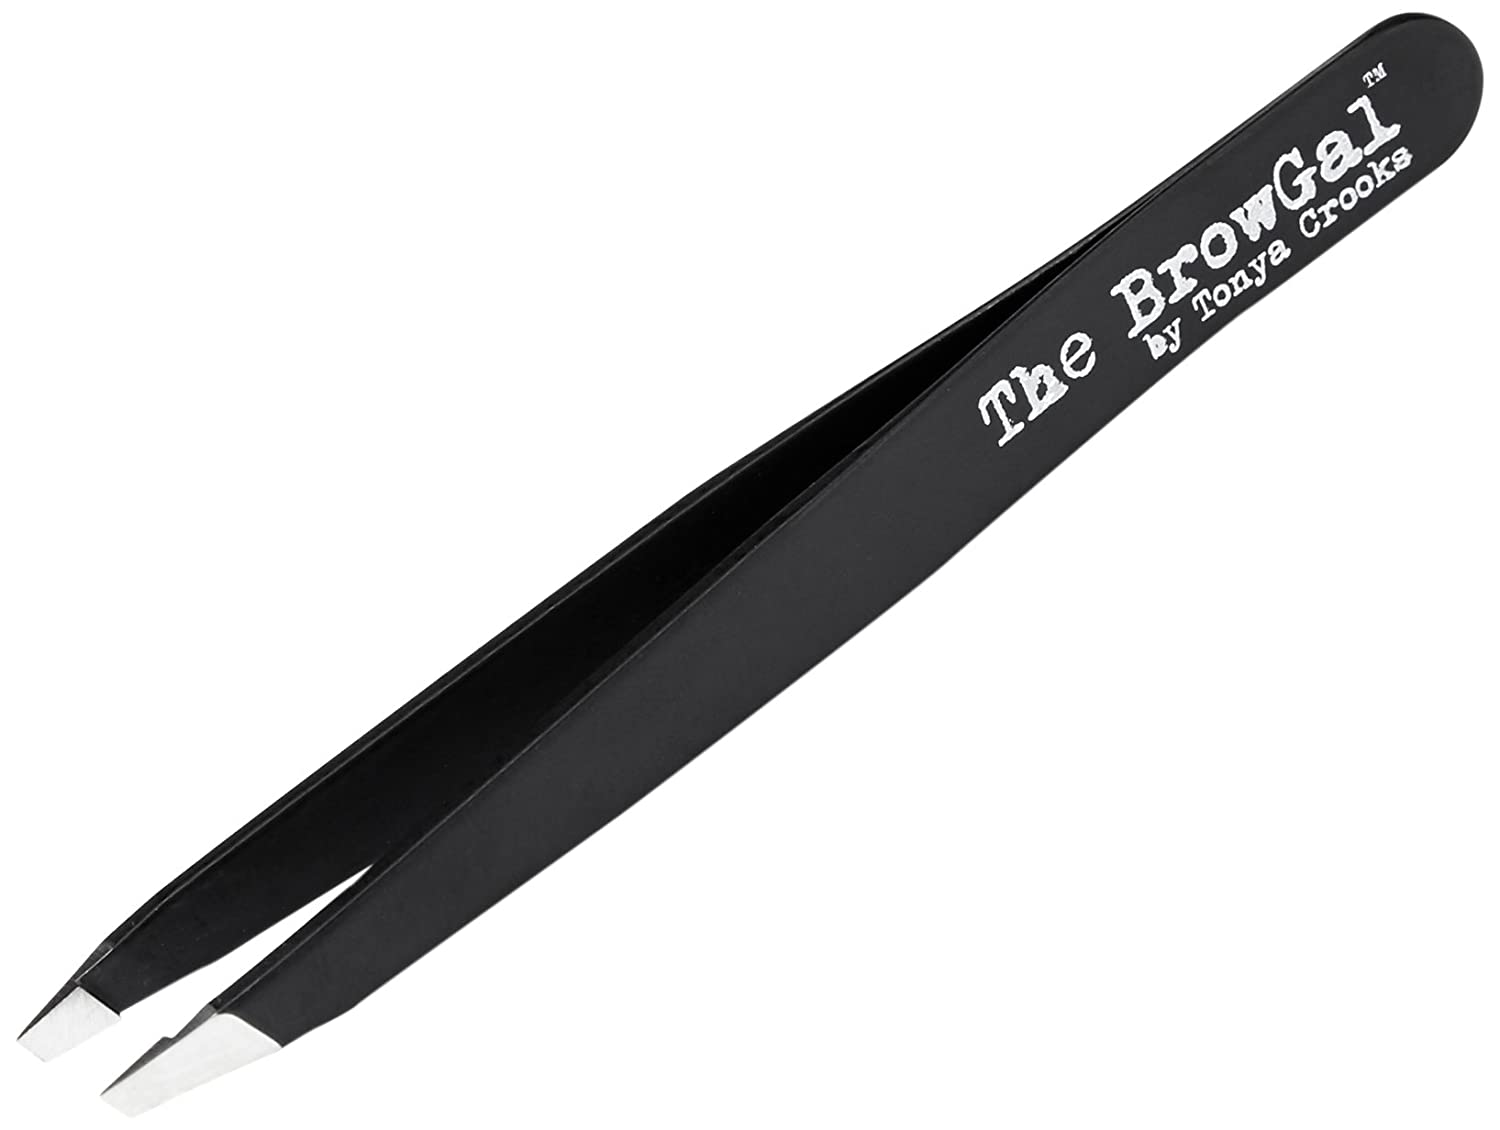 Primary image for The BrowGal Tweezers